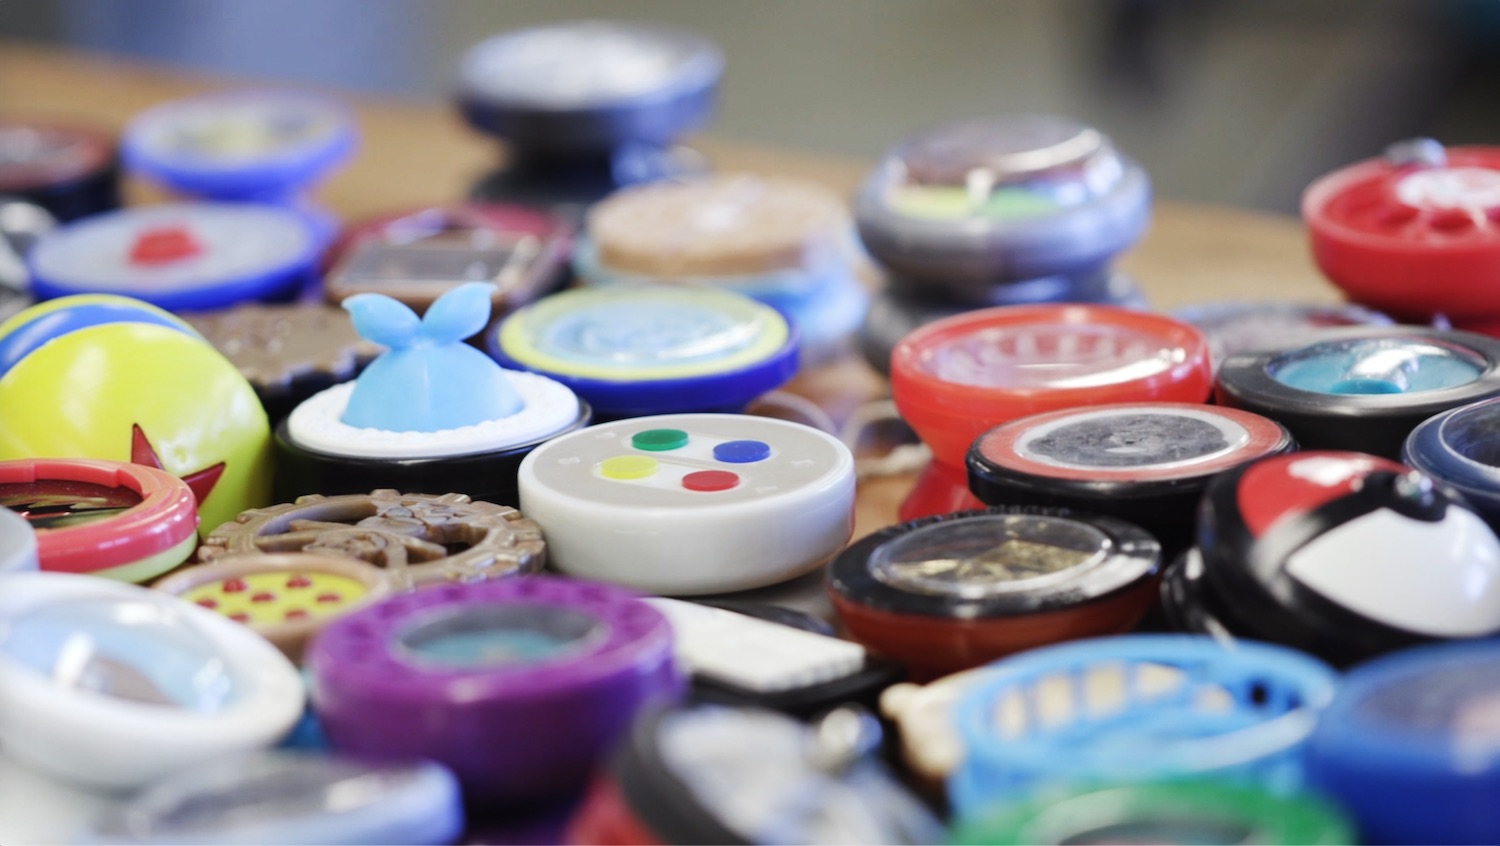 Yo-yos offer a first foray into manufacturing at scale, MIT News